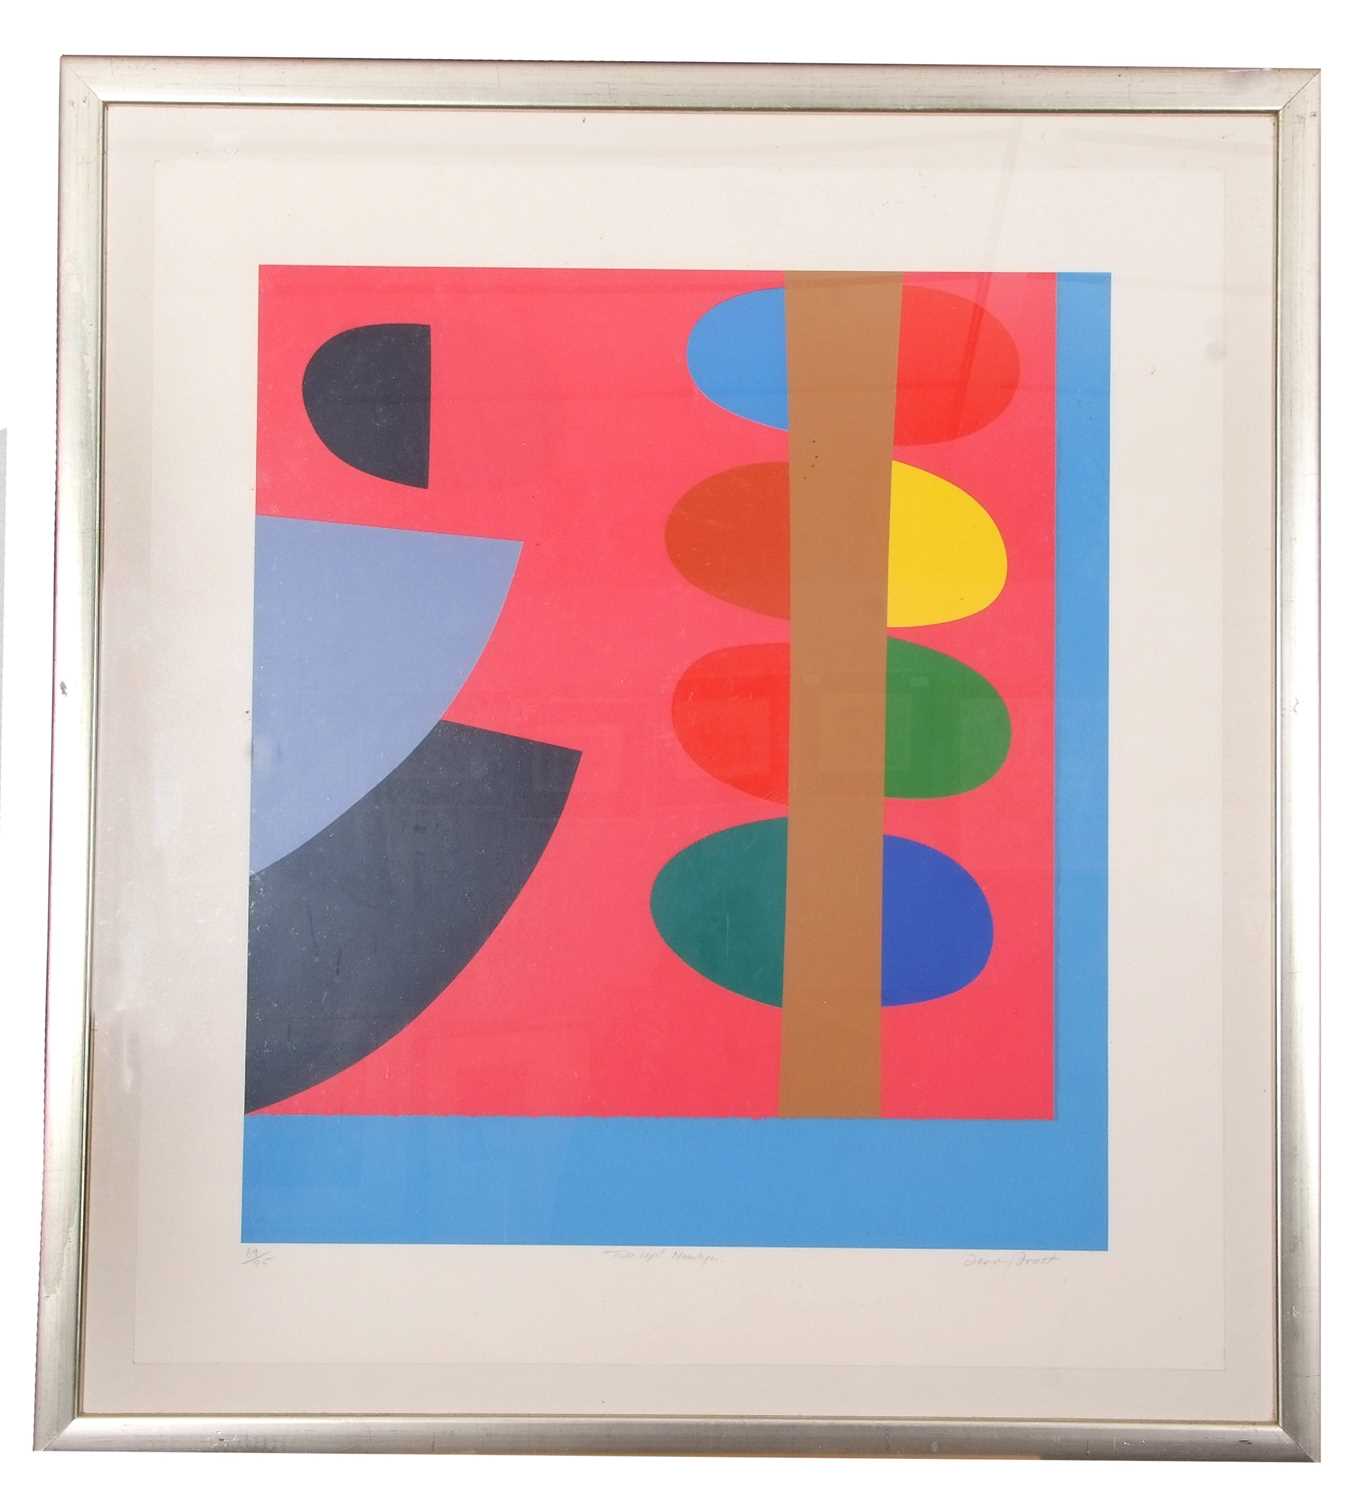 Terry Frost RA (1915-2003), 'Tide Up Newlyn', limited edition screenprint, numbered 69/75 and signed - Image 2 of 4